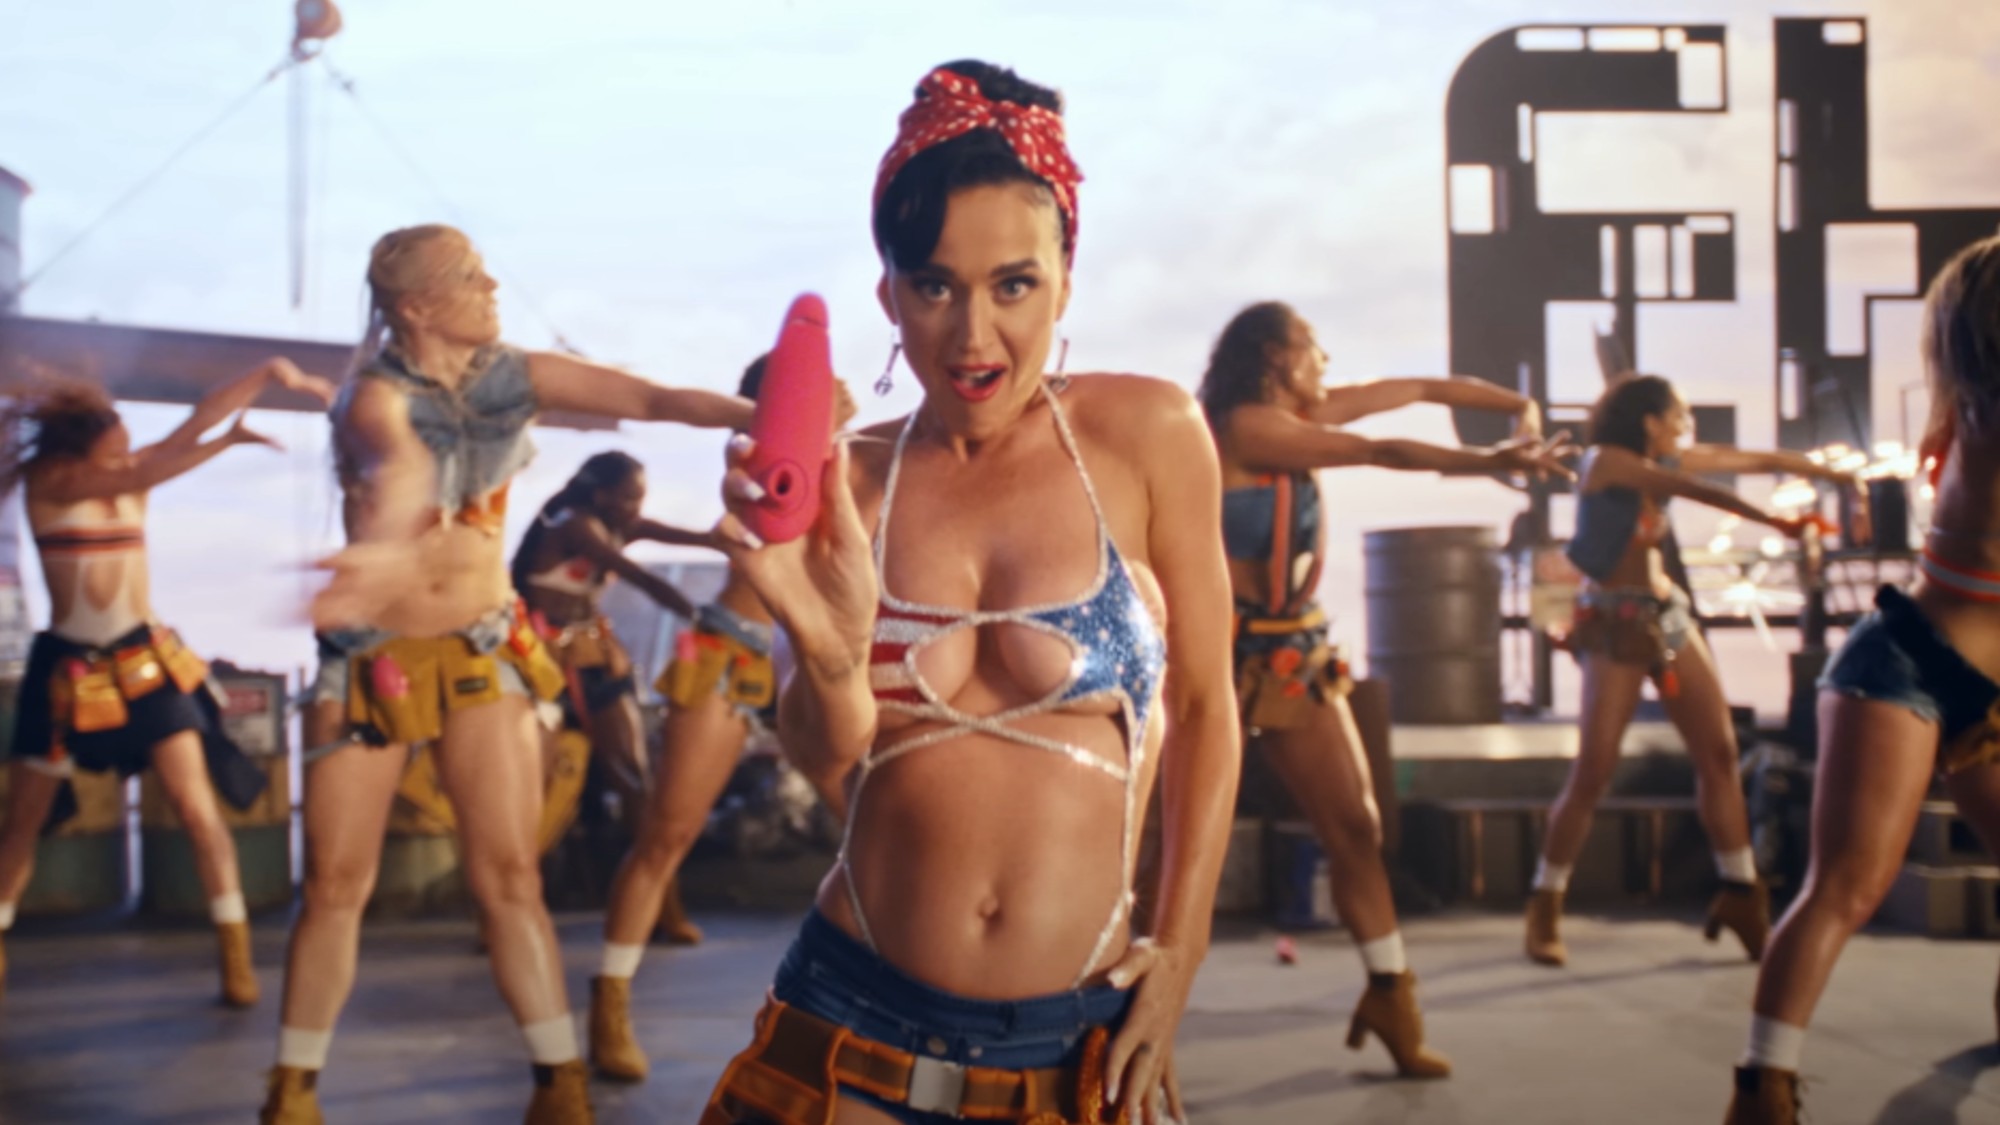  Why Katy Perry's on trial at the 'pop culture Hague' 